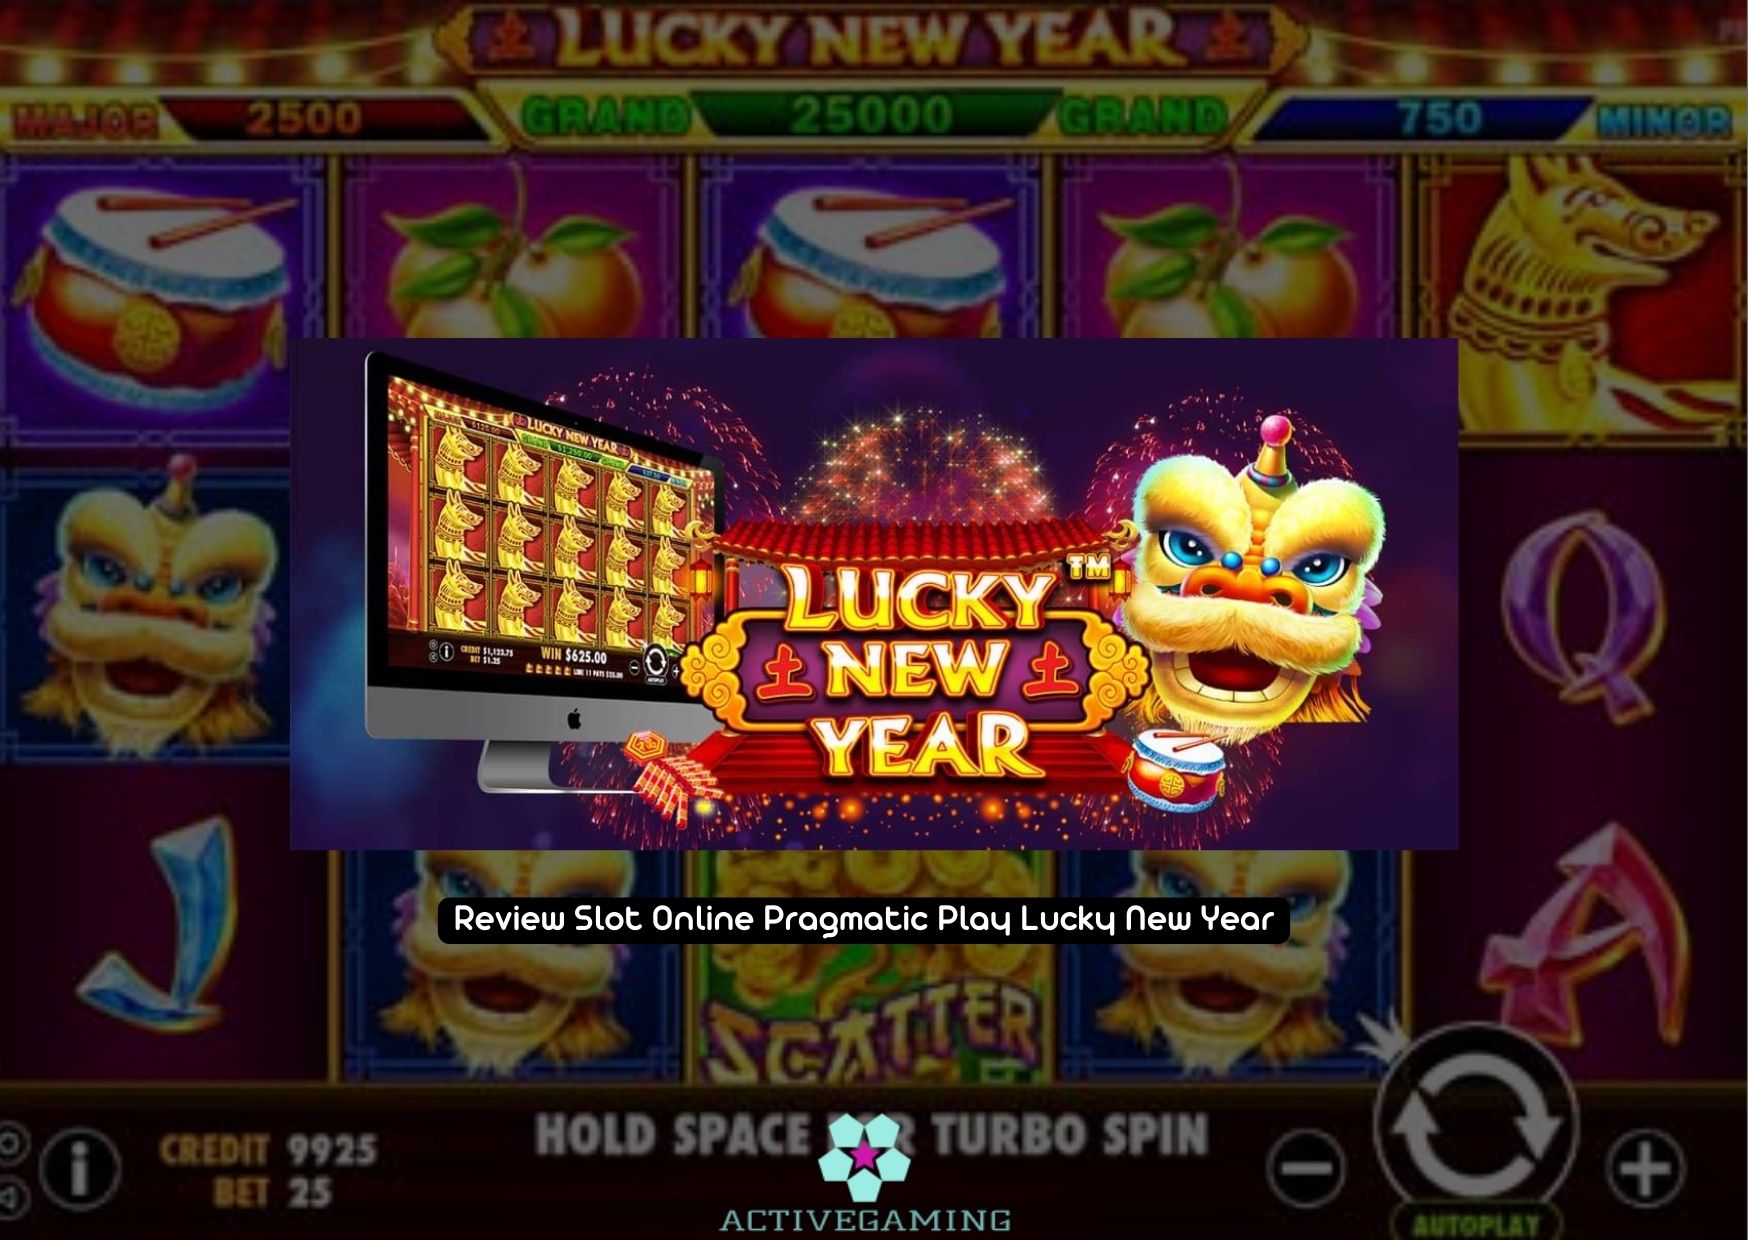 Review Slot Online Pragmatic Play Lucky New Year